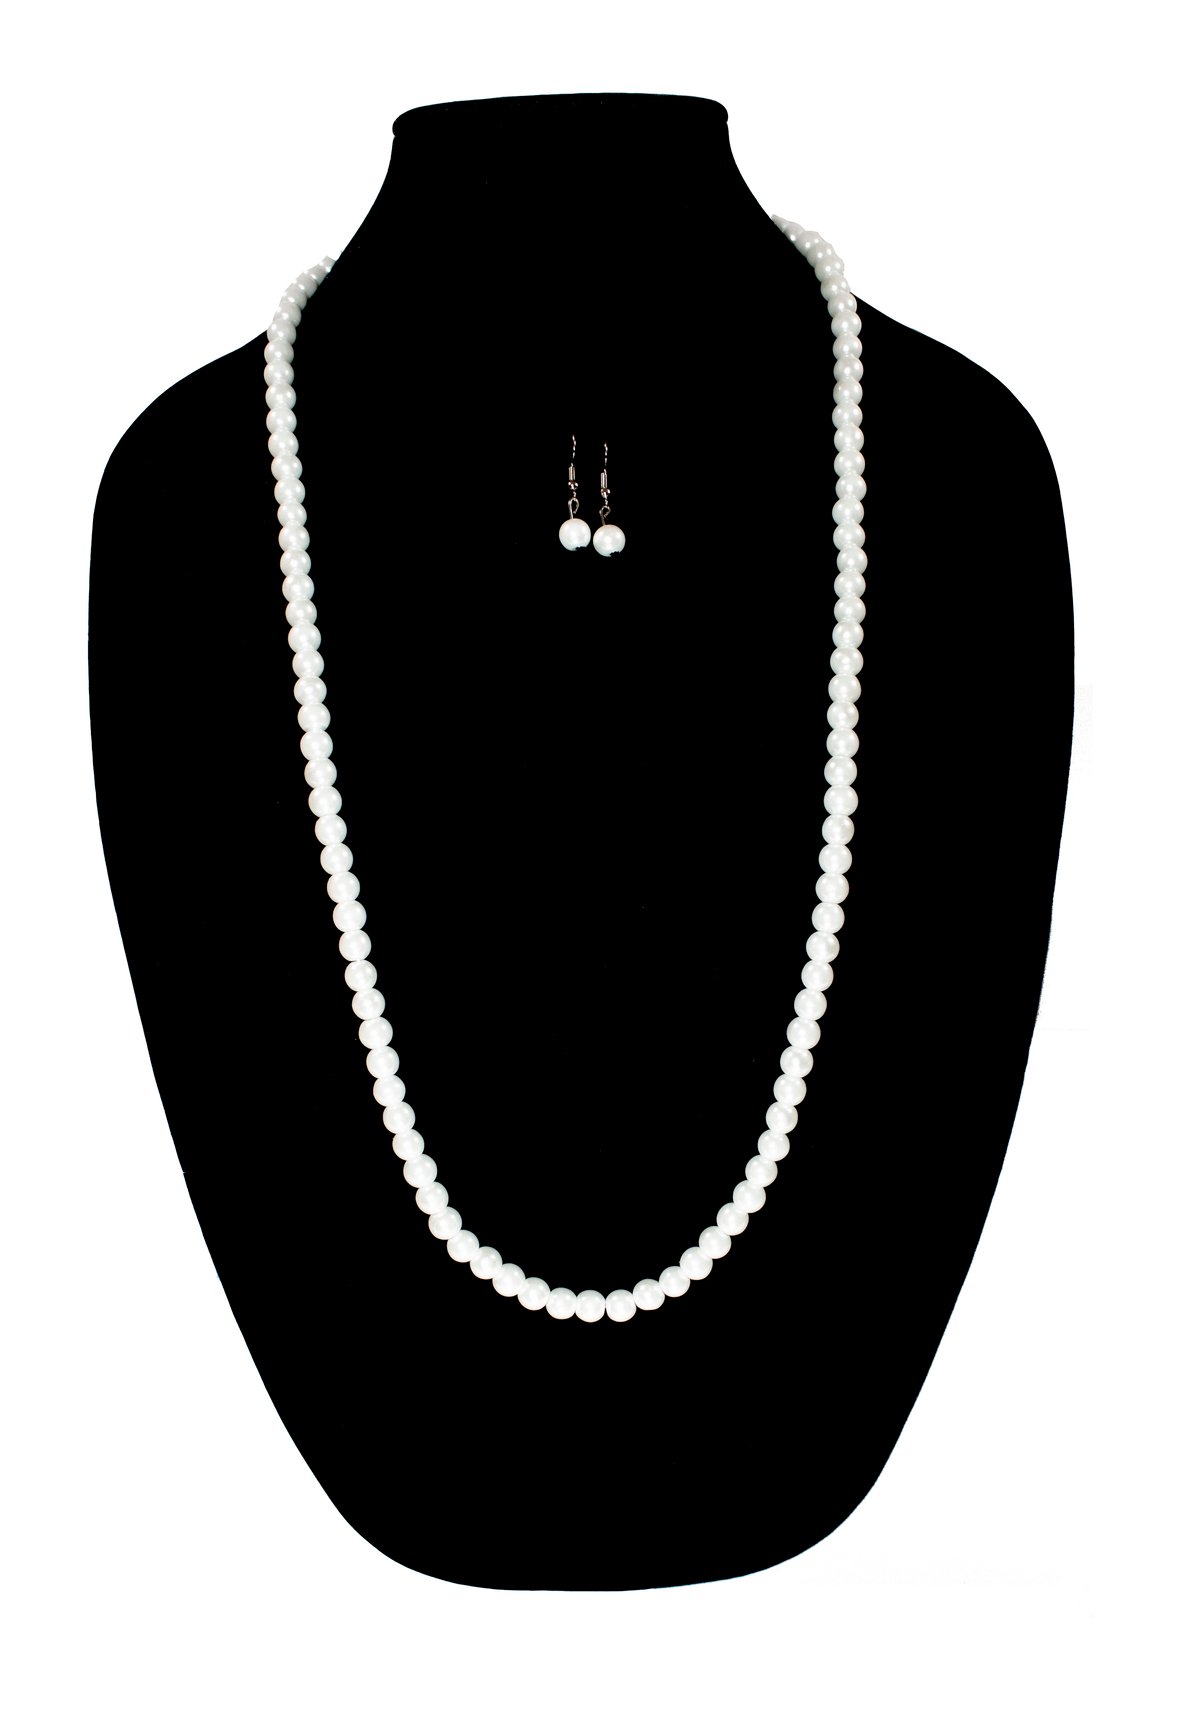 Image of A strand of pearls set